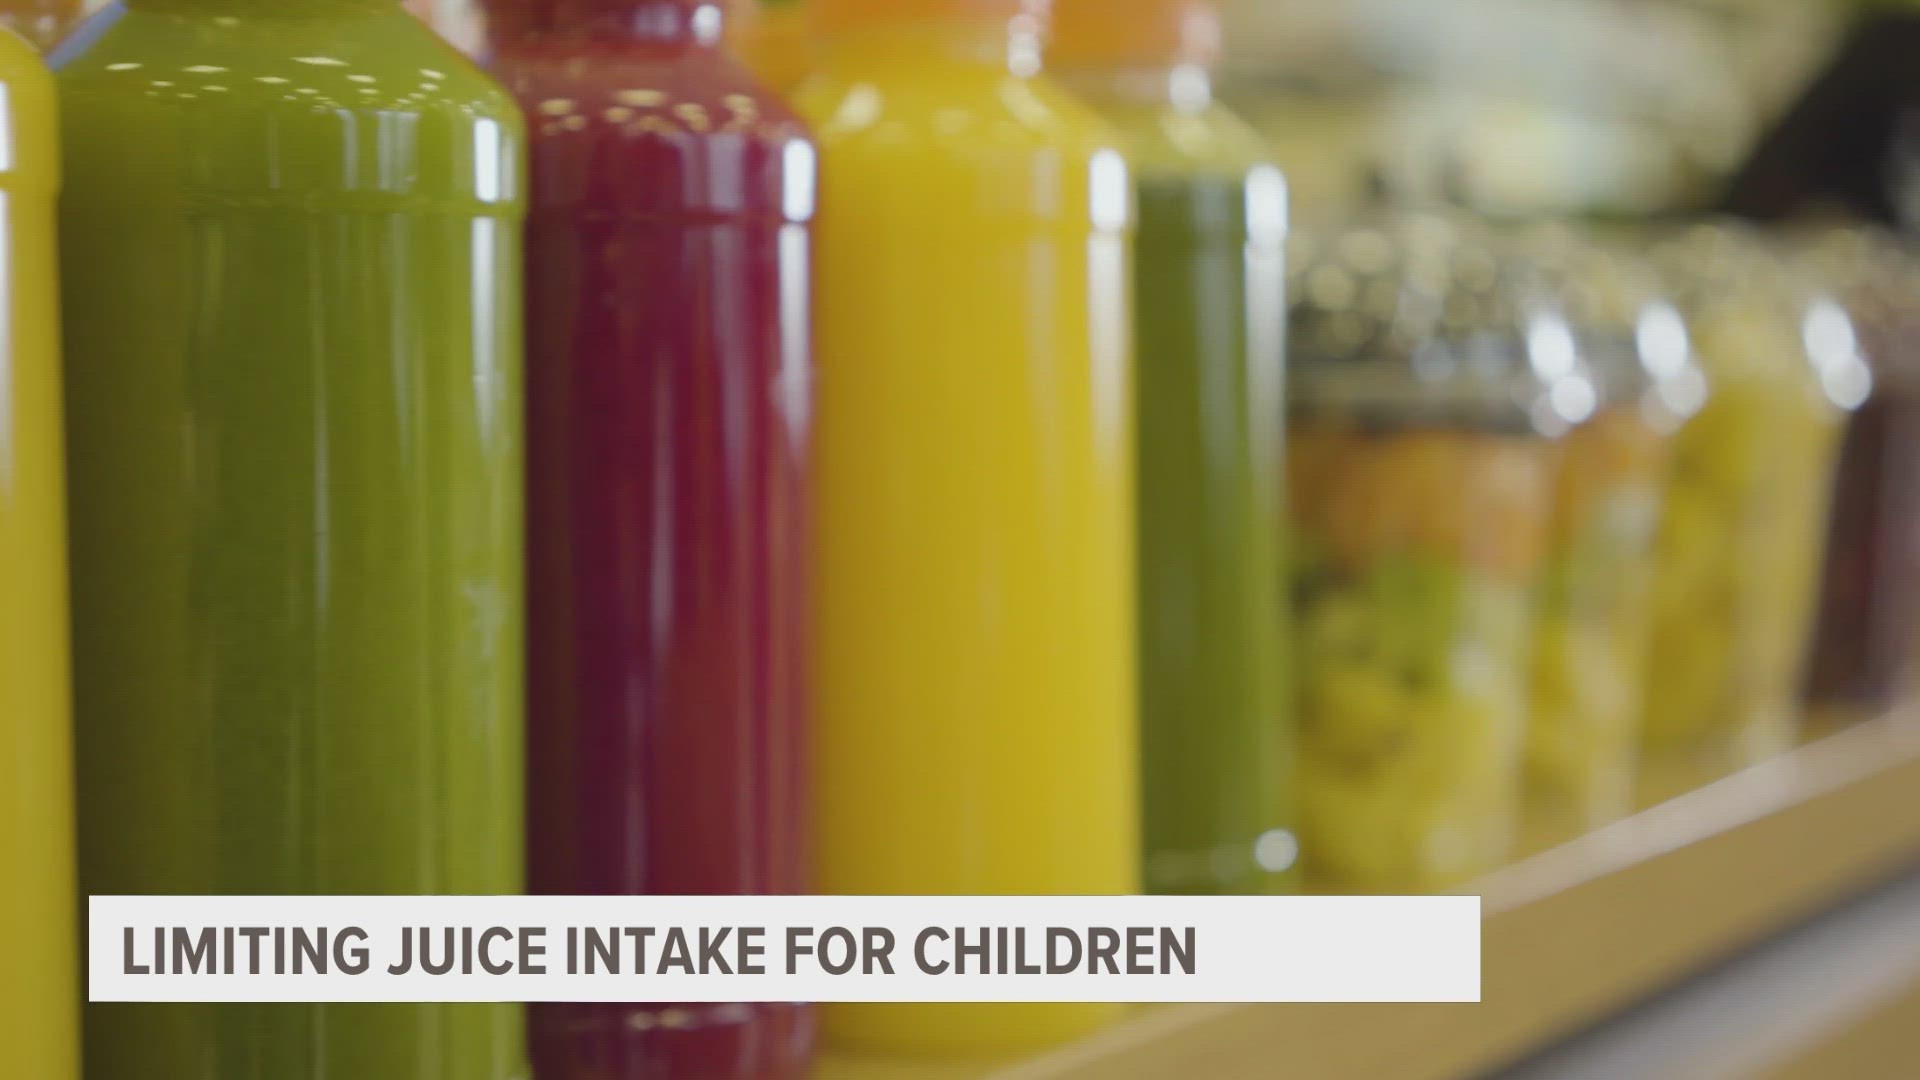 A new study published in Journal of the American Medical Association Pediatrics found 100% fruit juice is associated with weight gain in children.